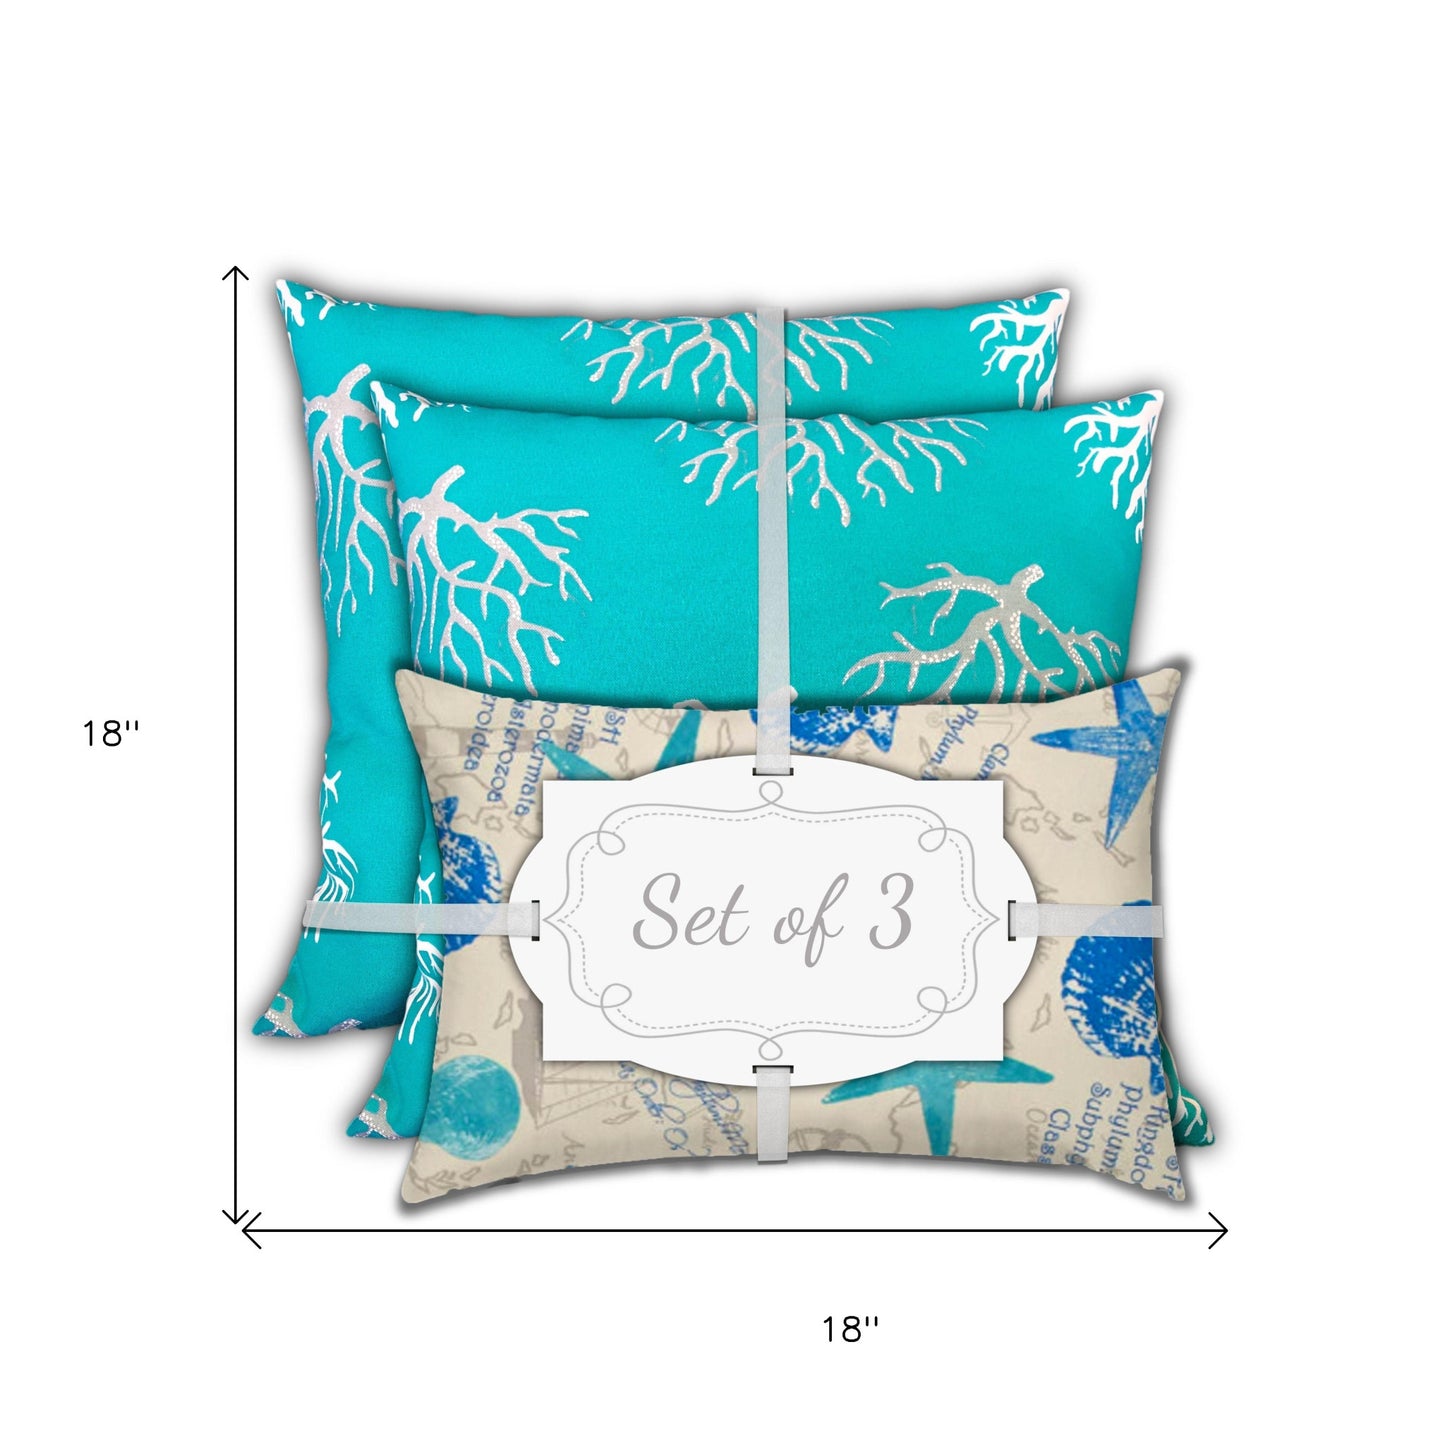 18" X 18" Ocean Blue And White Zippered Nautical Throw Indoor Outdoor Pillow